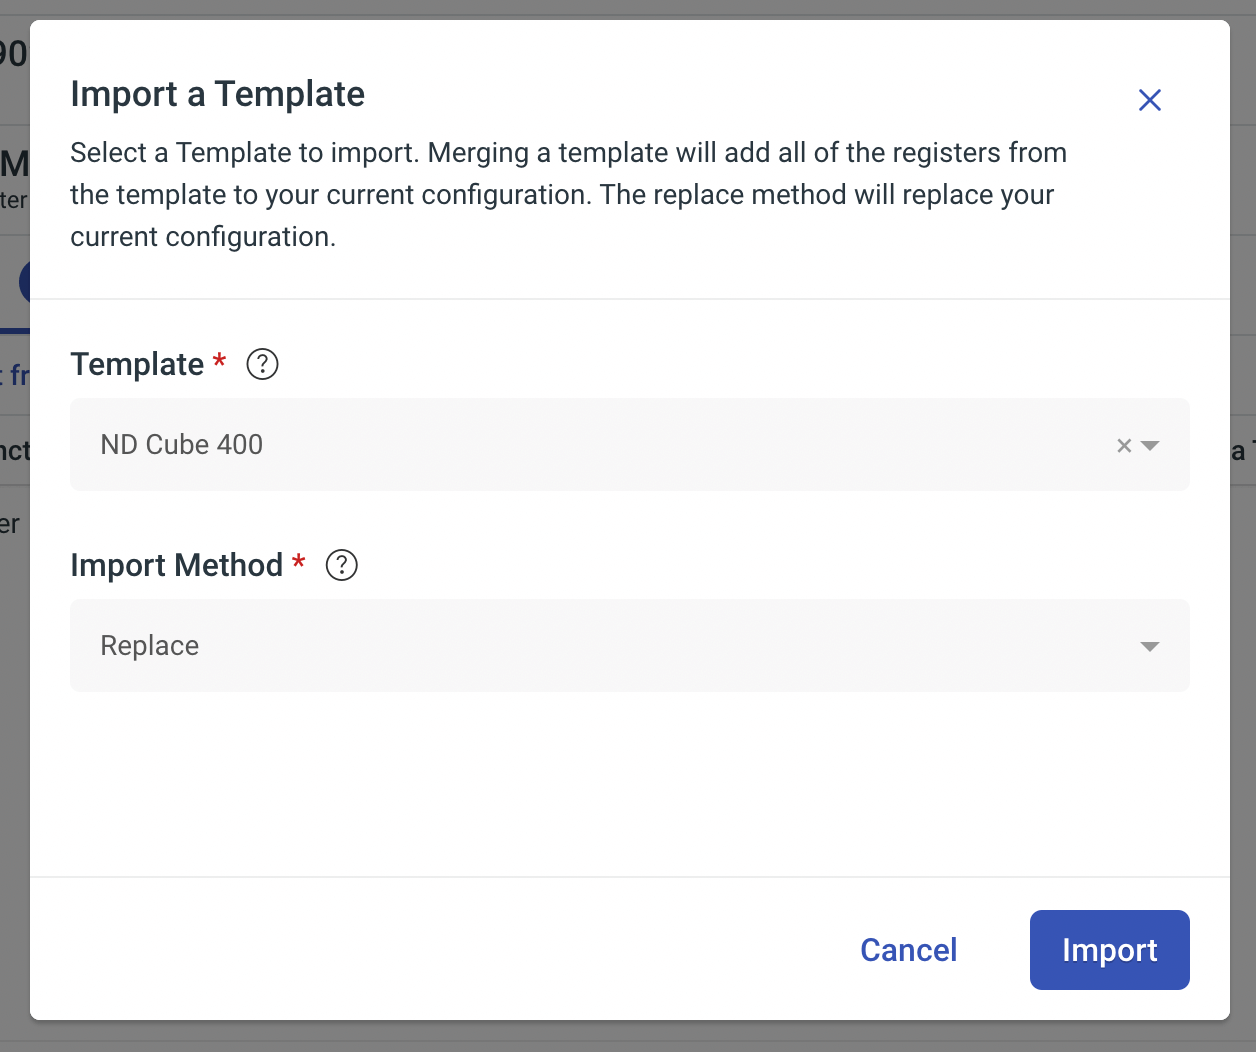 Importing a Template